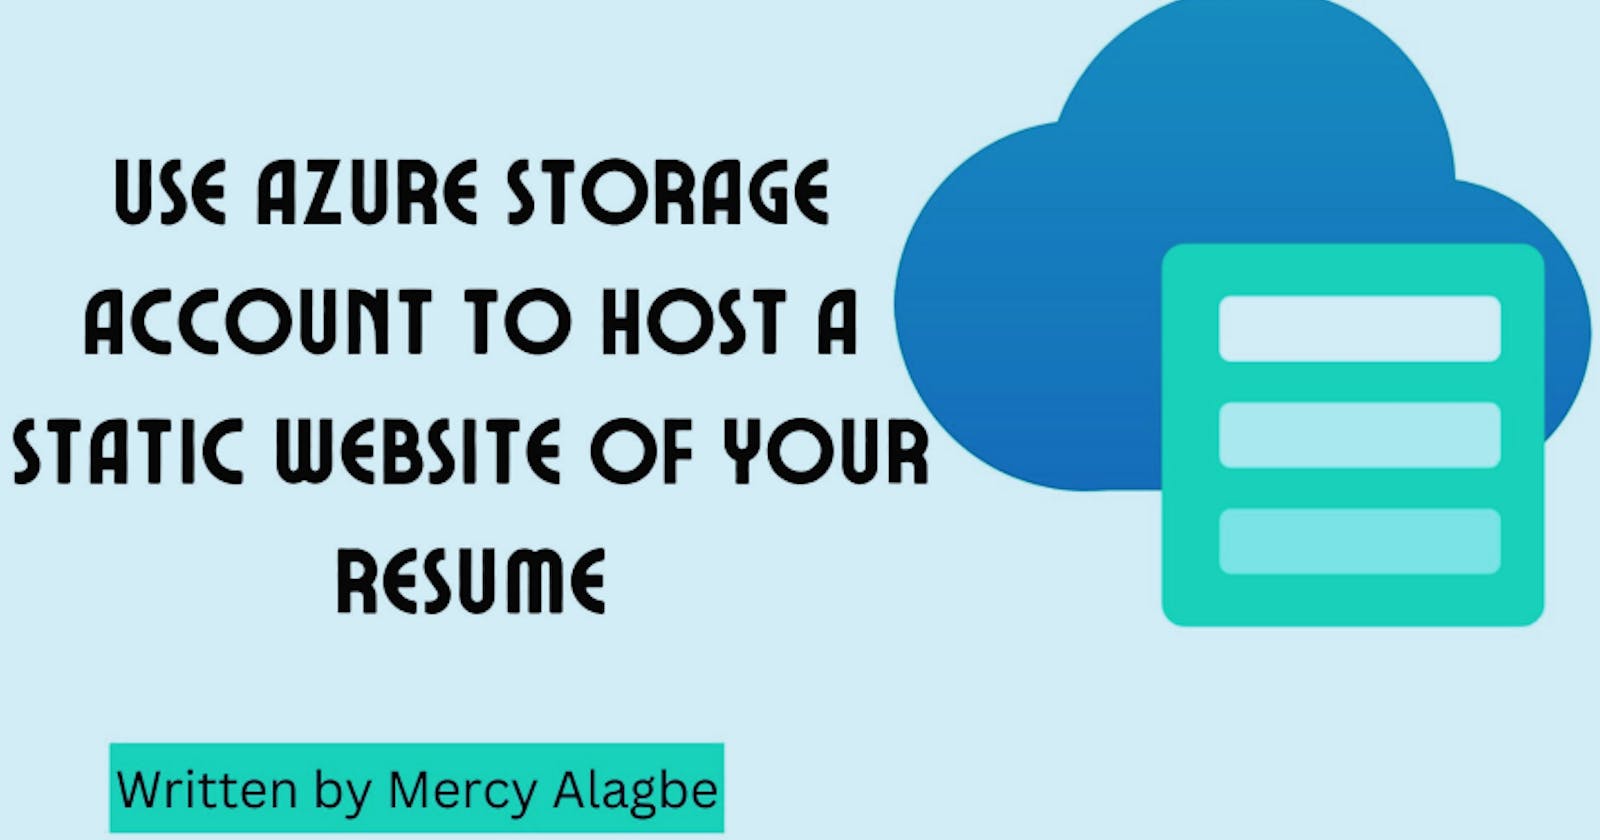 Use Azure Storage Account to host a Static Website of your resume.